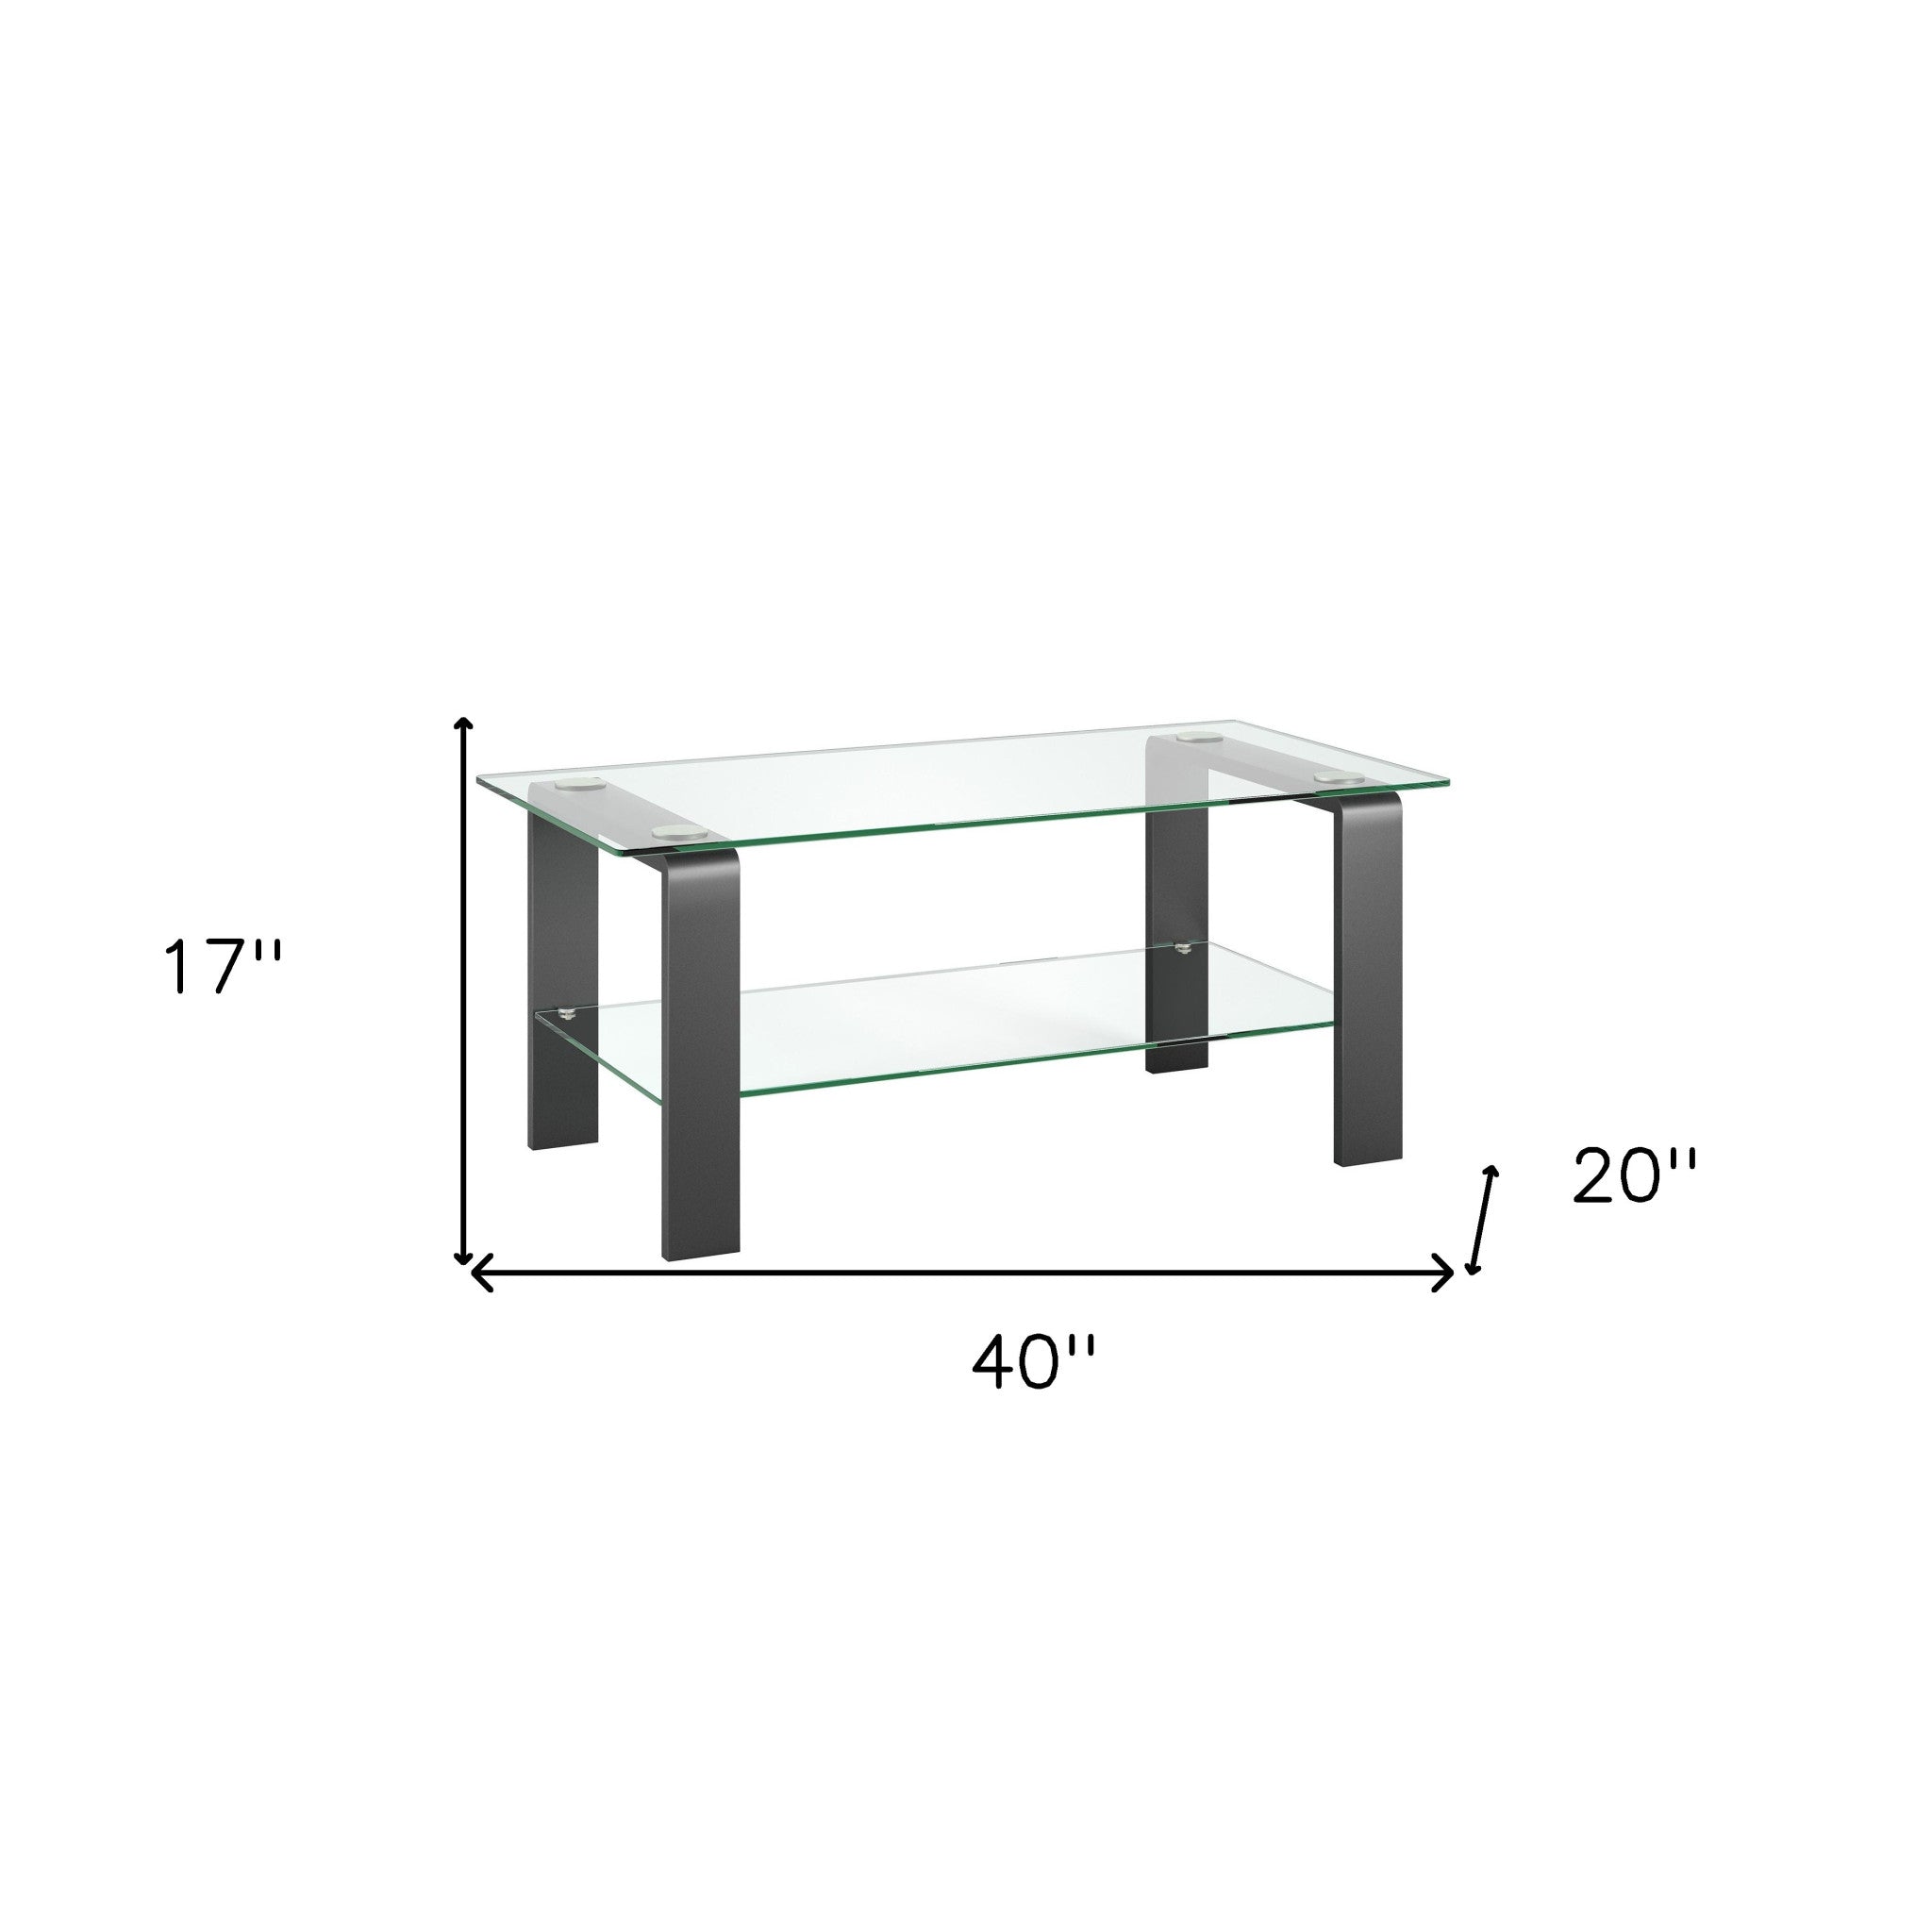 40" Gray Glass And Steel Coffee Table With Shelf